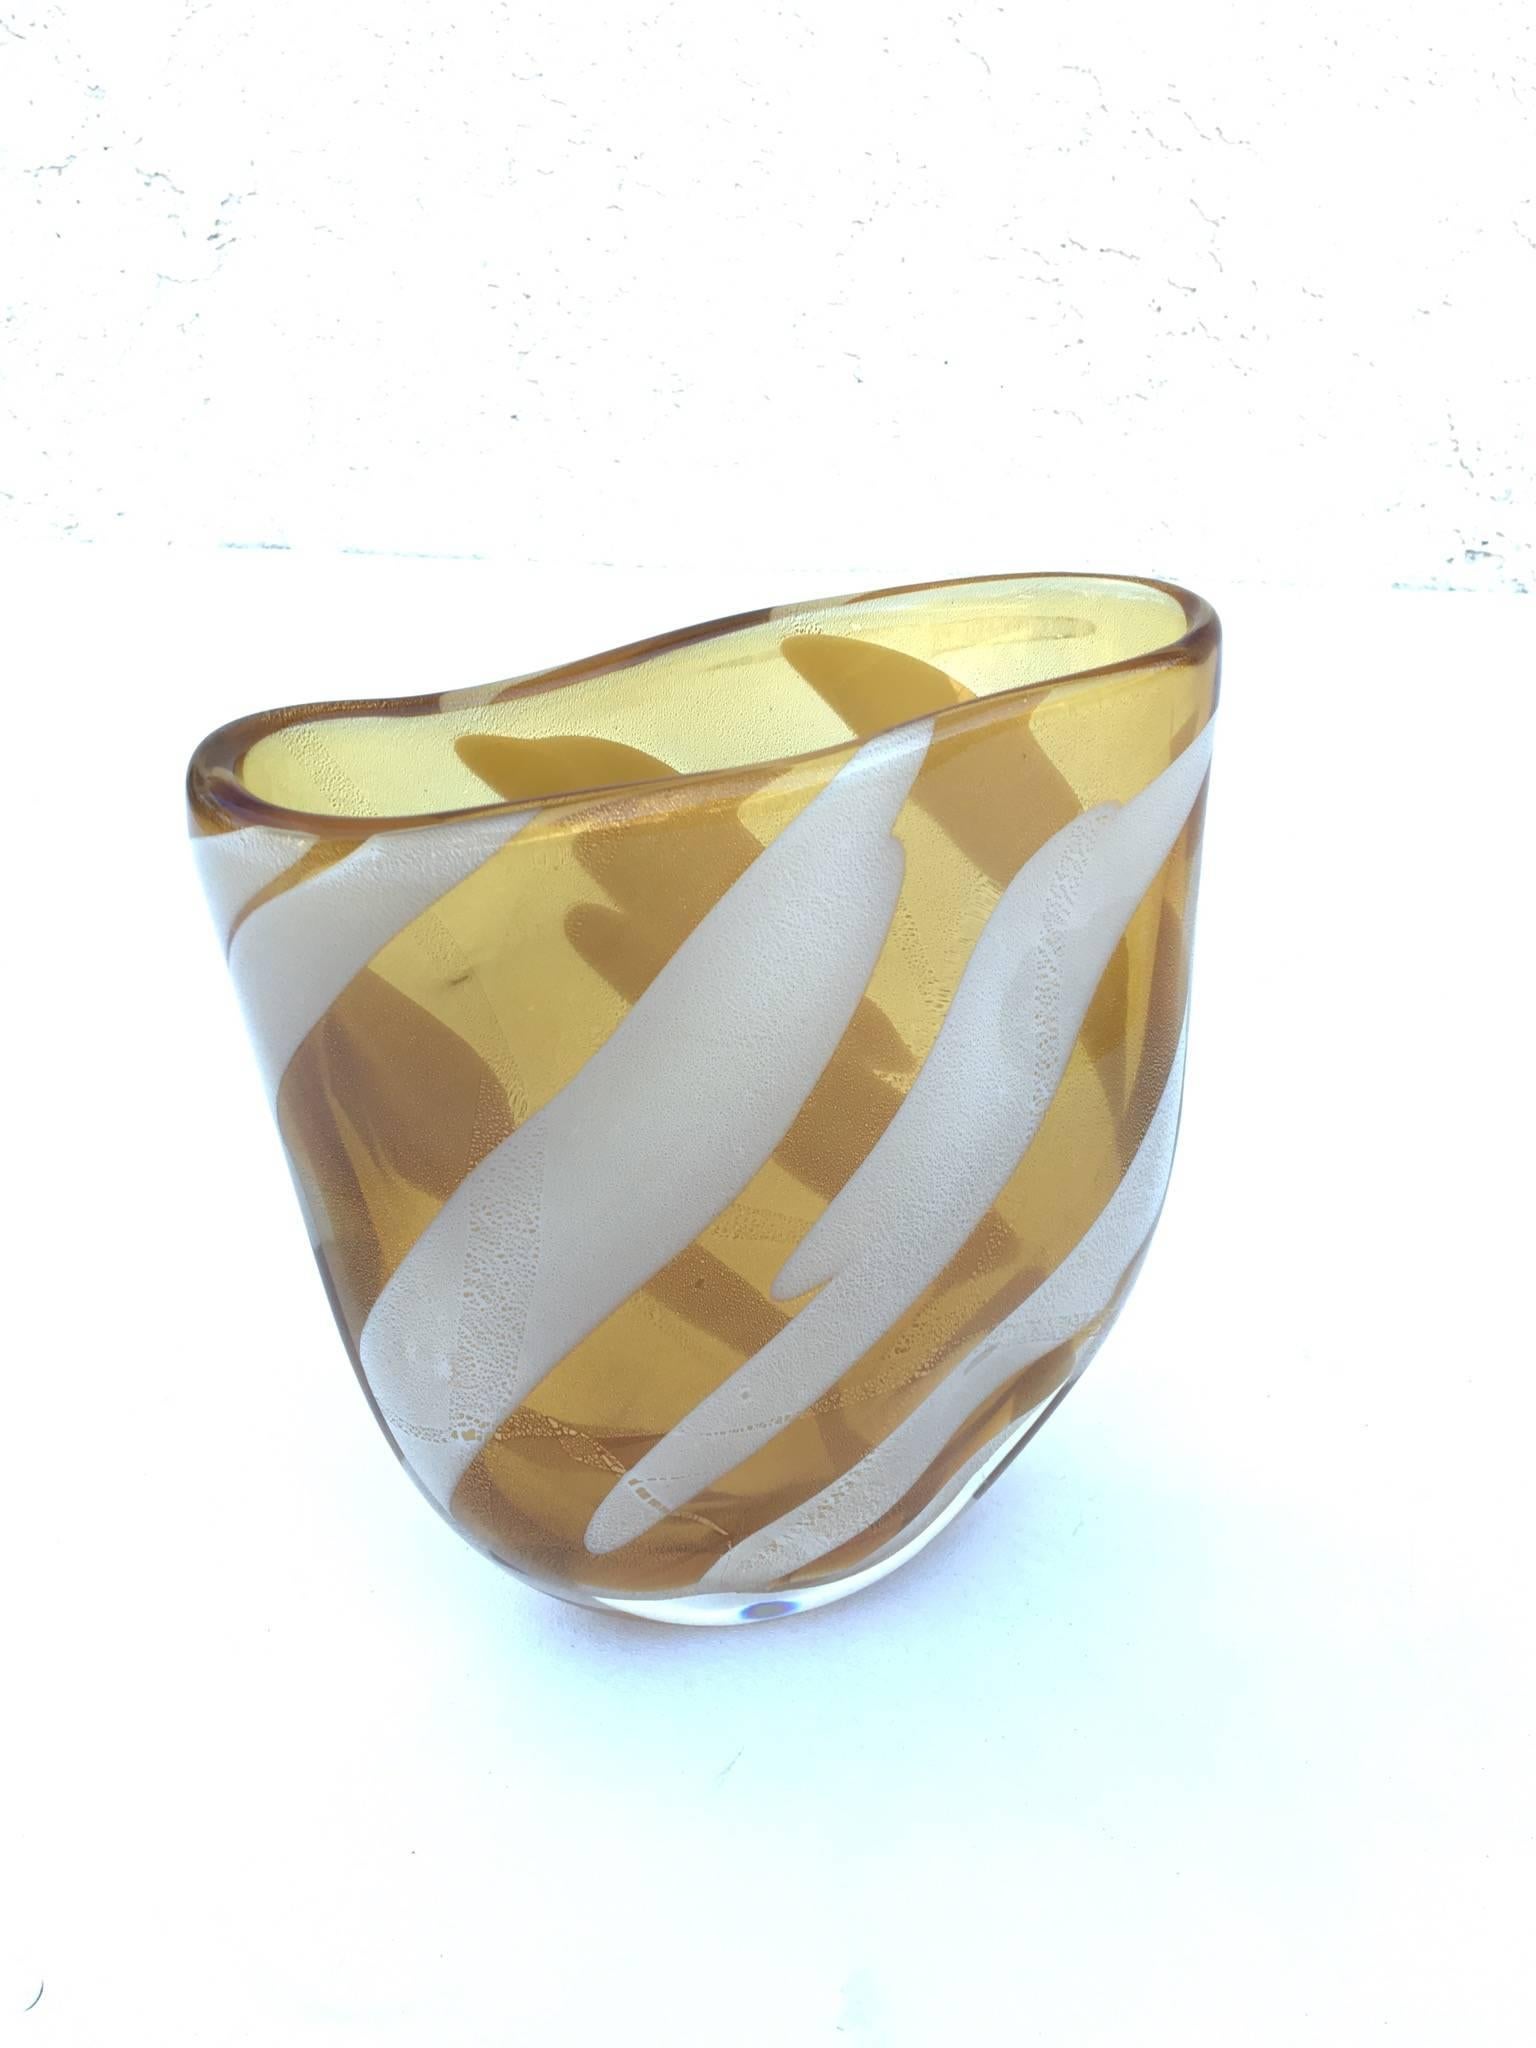 A beautiful 1960s murano glass vase with gold specks. 
Acid etched (Seguso Livio Murano) on the bottom.